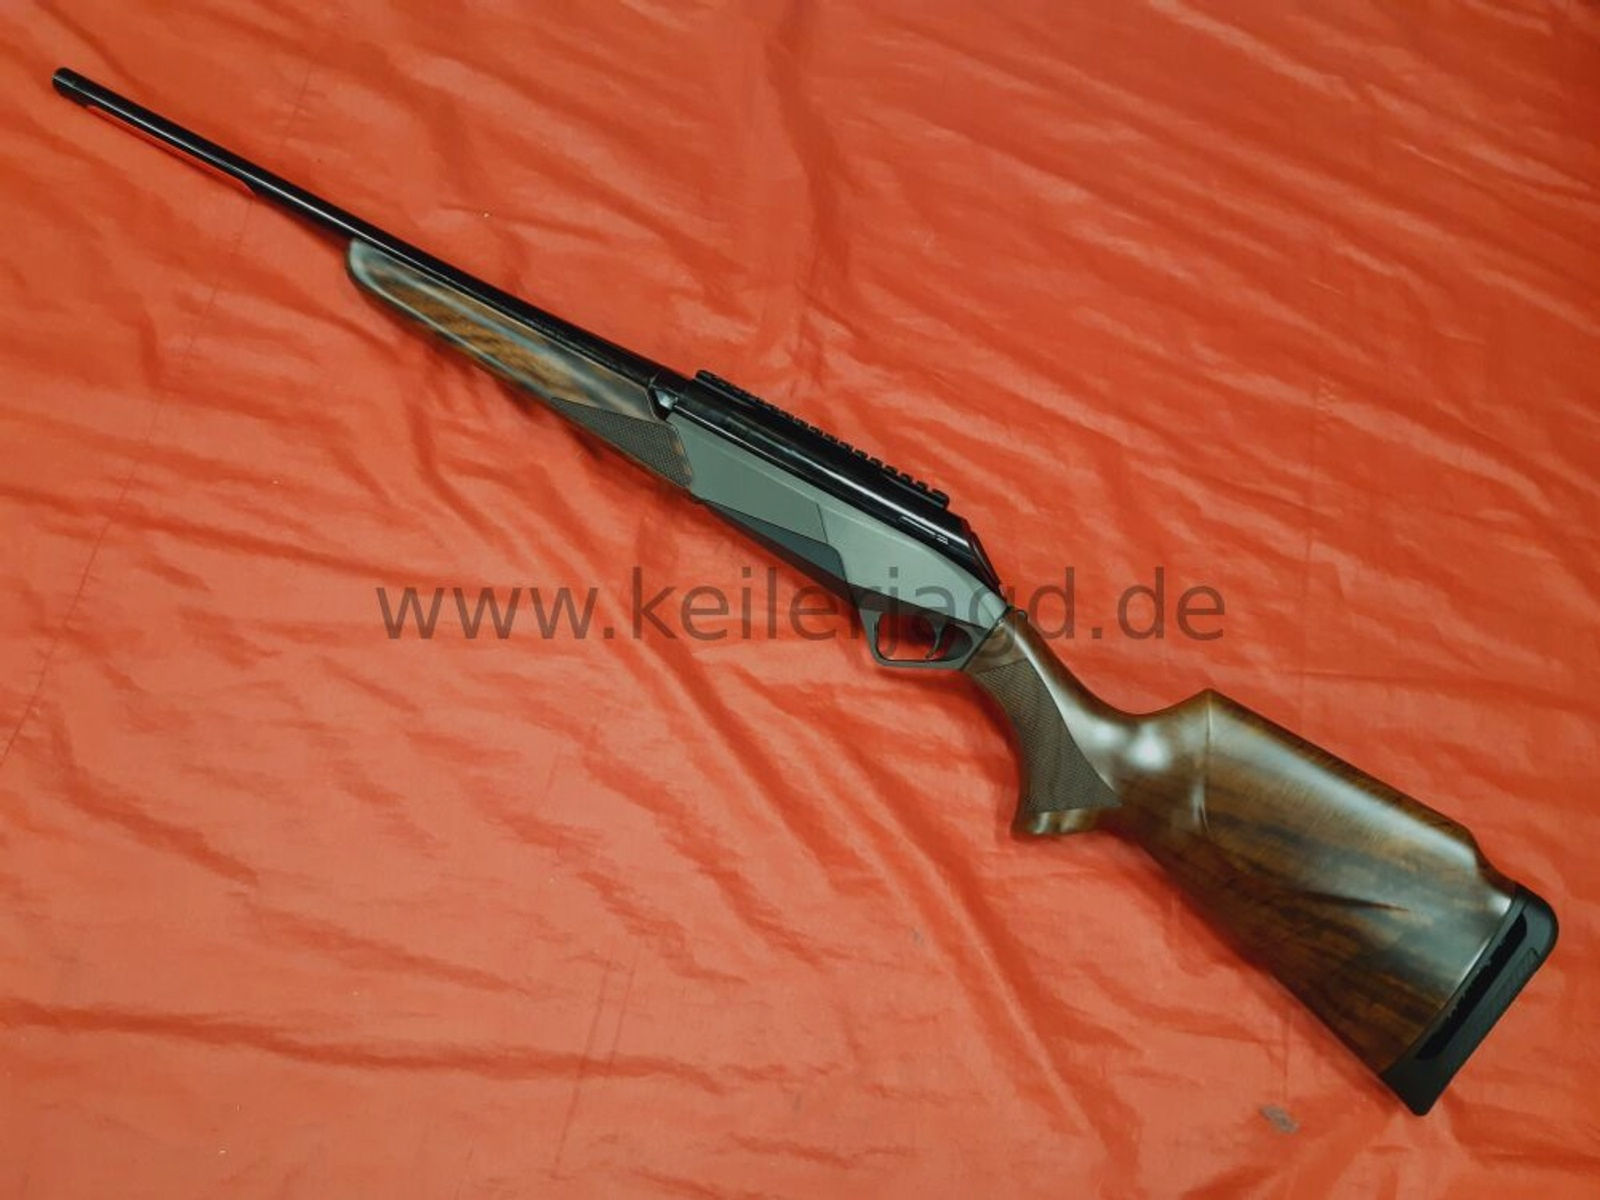 Benelli Lupo Holz Kal. 308 Win